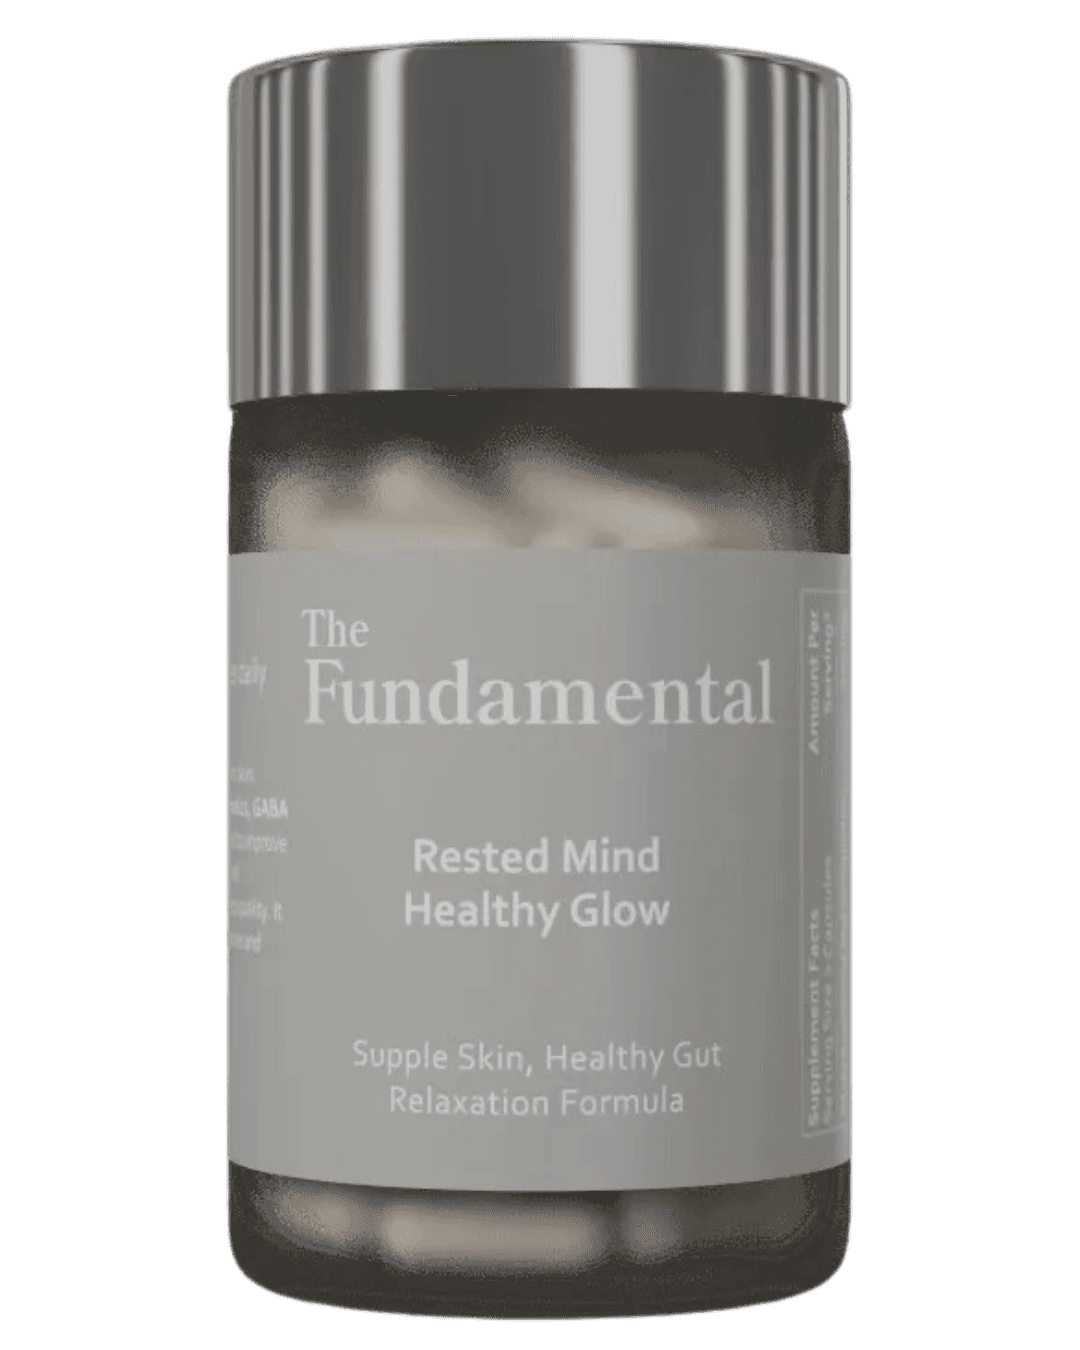 The Fundamental Rested Mind Healthy Glow